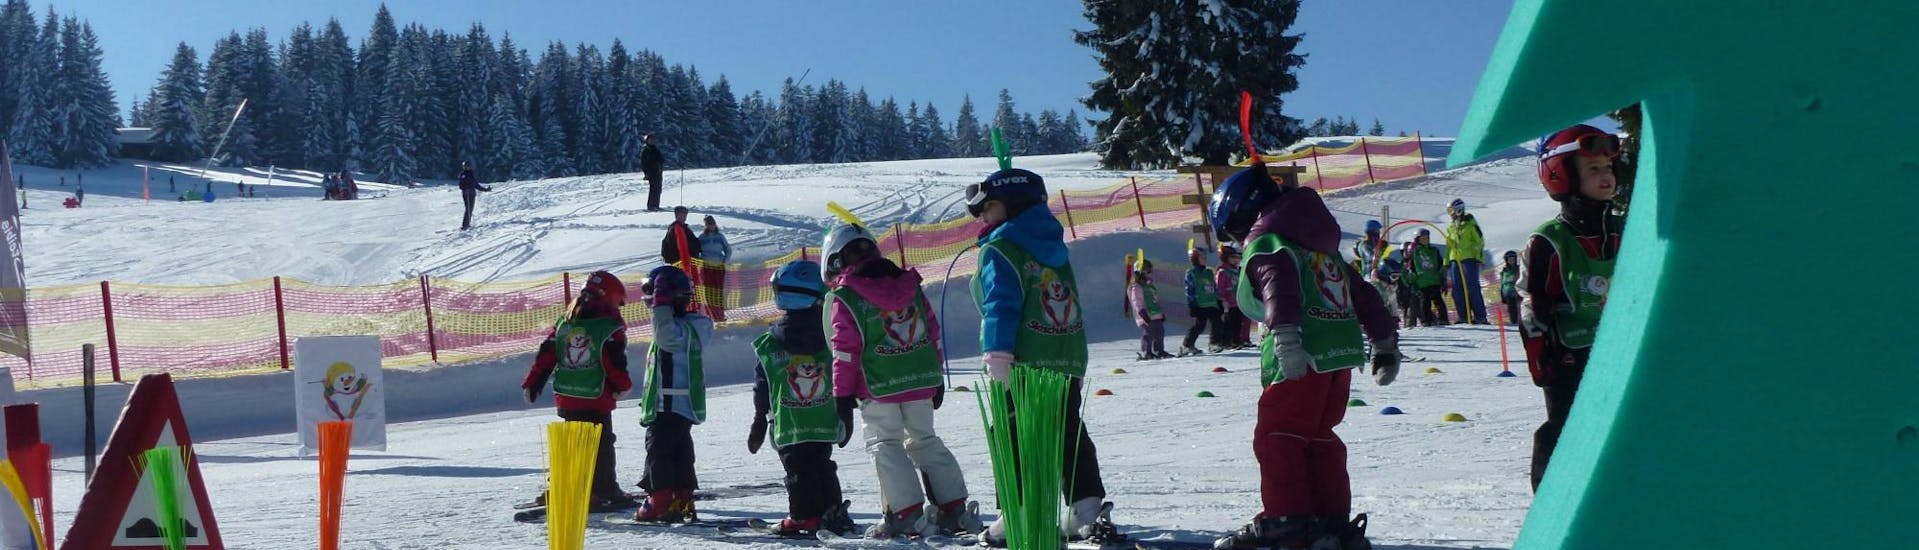 In the children's area of Skischule Steibis the participants of the Kids Ski Lessons "Zimi's Snow Adventure" (2.5-4 years) gain their first experience on skis.